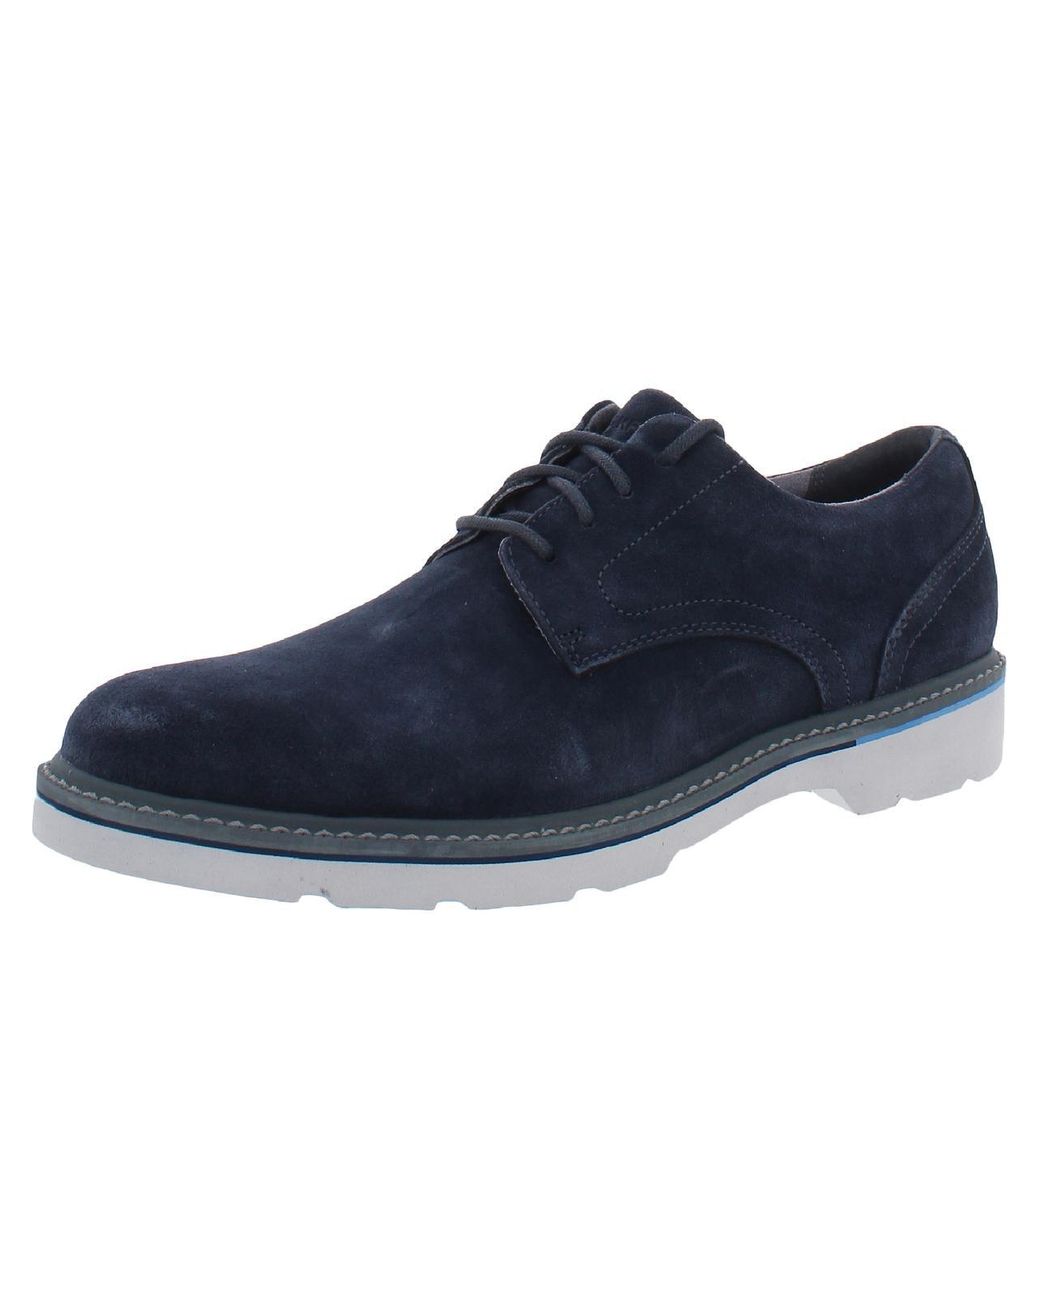 Rockport Charlee Plain Toe Leather Order Control Derby Shoes in Blue ...